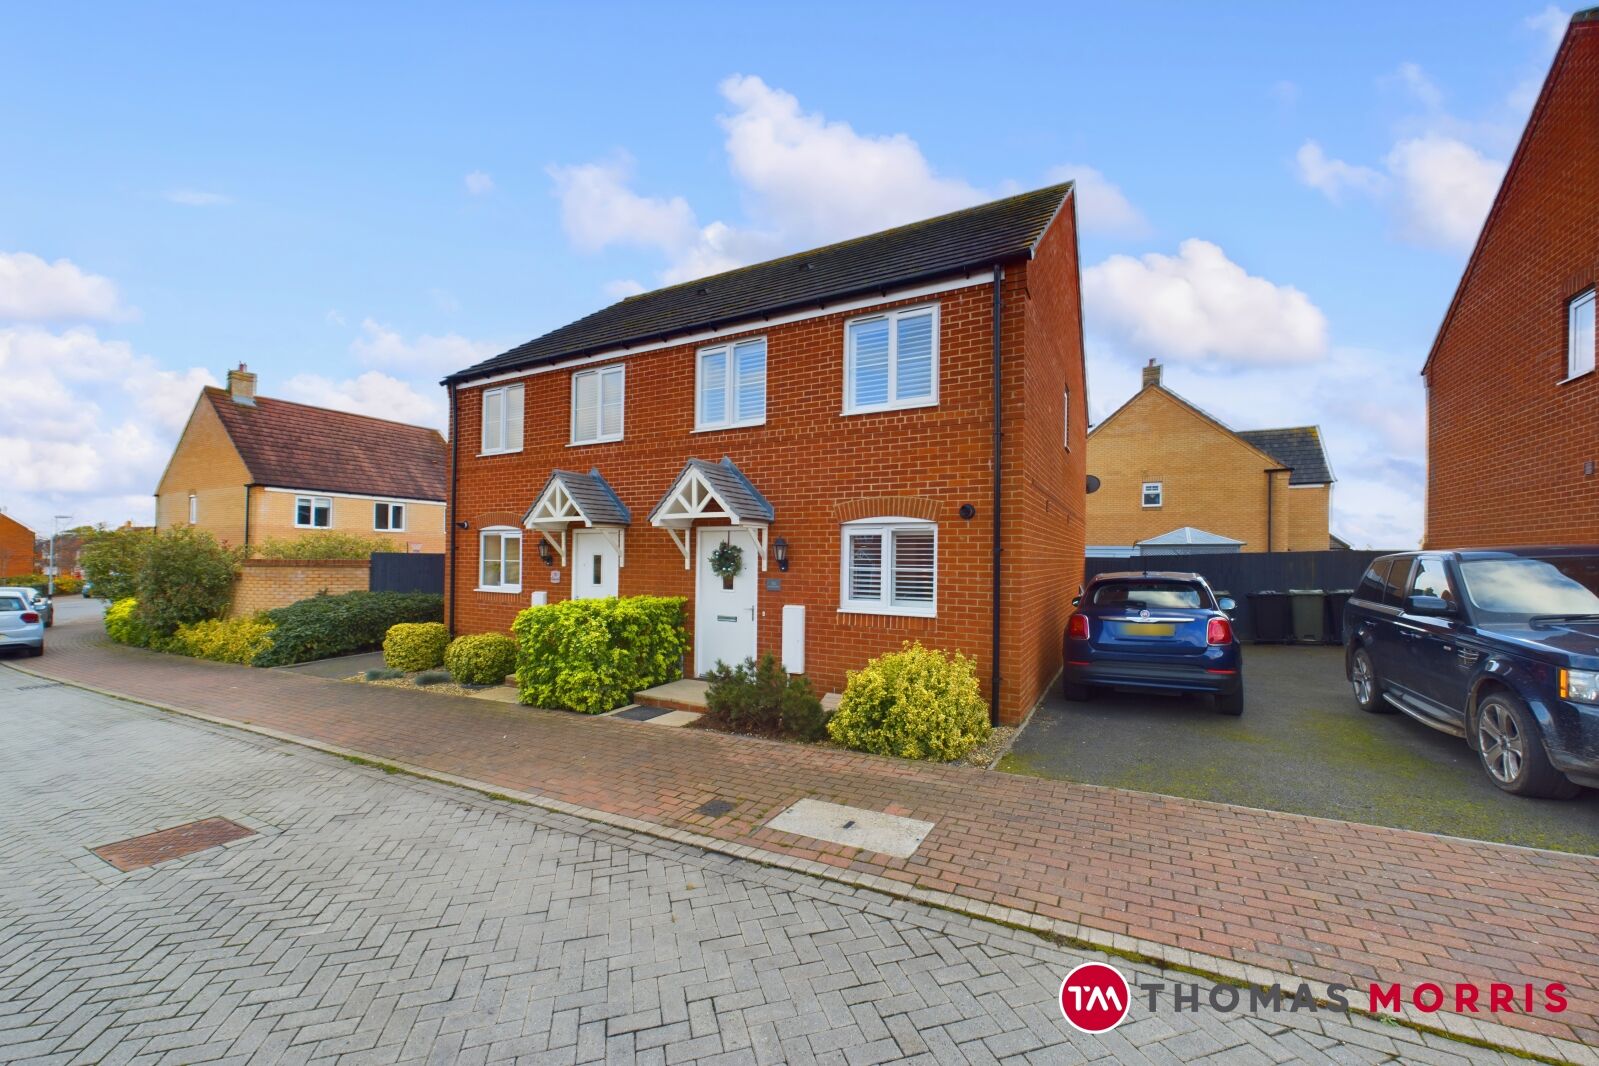 2 bedroom semi detached house for sale Woodpecker Mead, Lower Stondon, SG16, main image